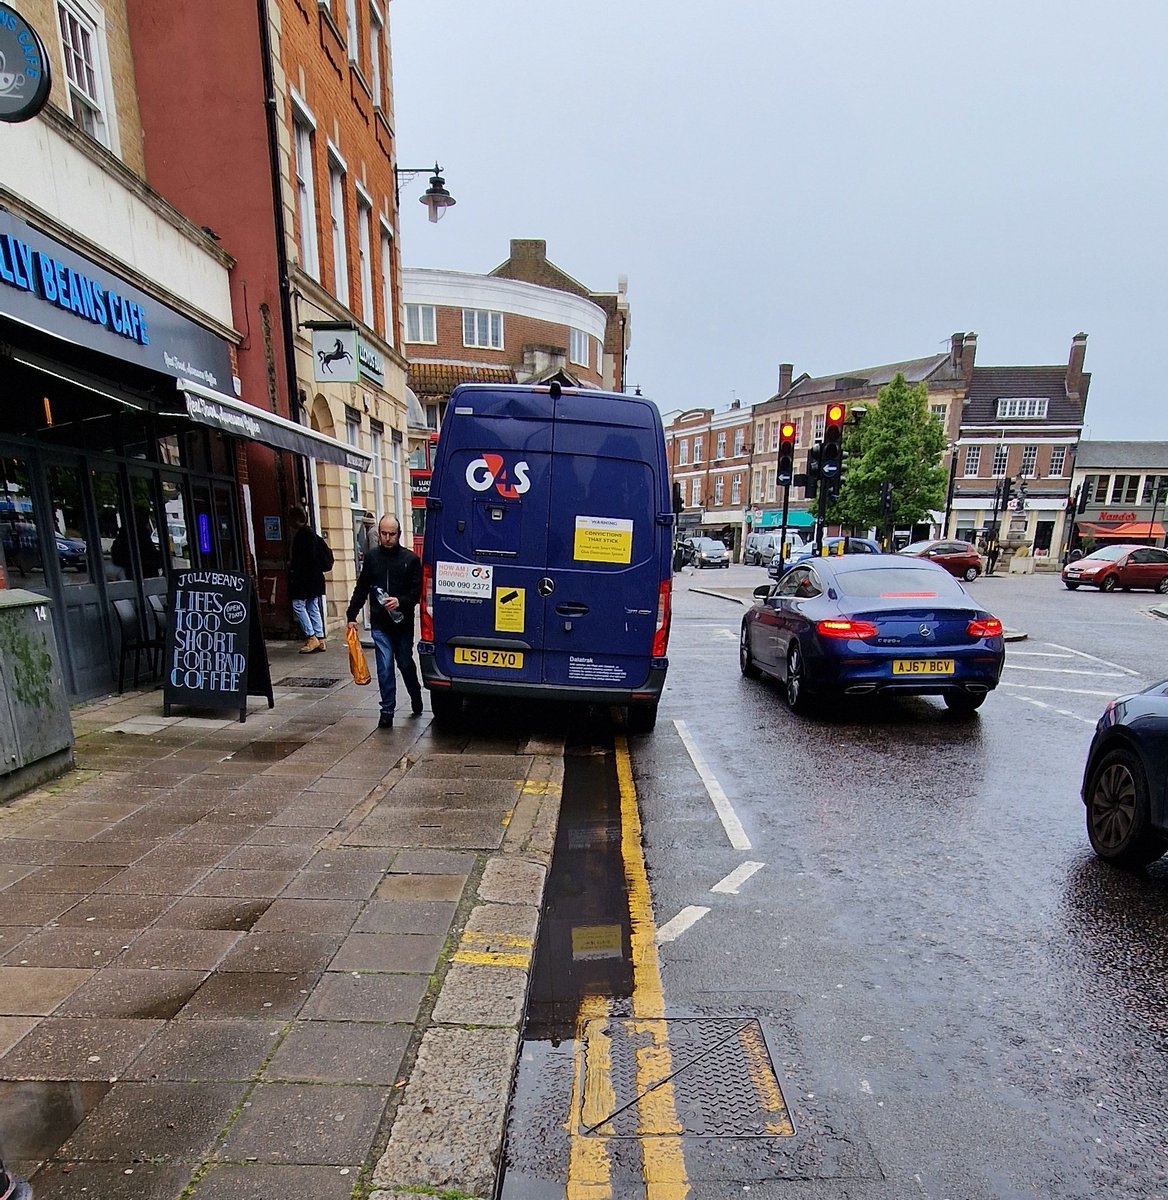 @G4S @G4SUKI van parked on pavement, in cycle lane, on double yellow lines in close proximity to a junction. @YPLAC @EnfieldCouncil @BetterSt4Enf @MPSEnfield @JourneysPlaces @MPSEnfieldTown